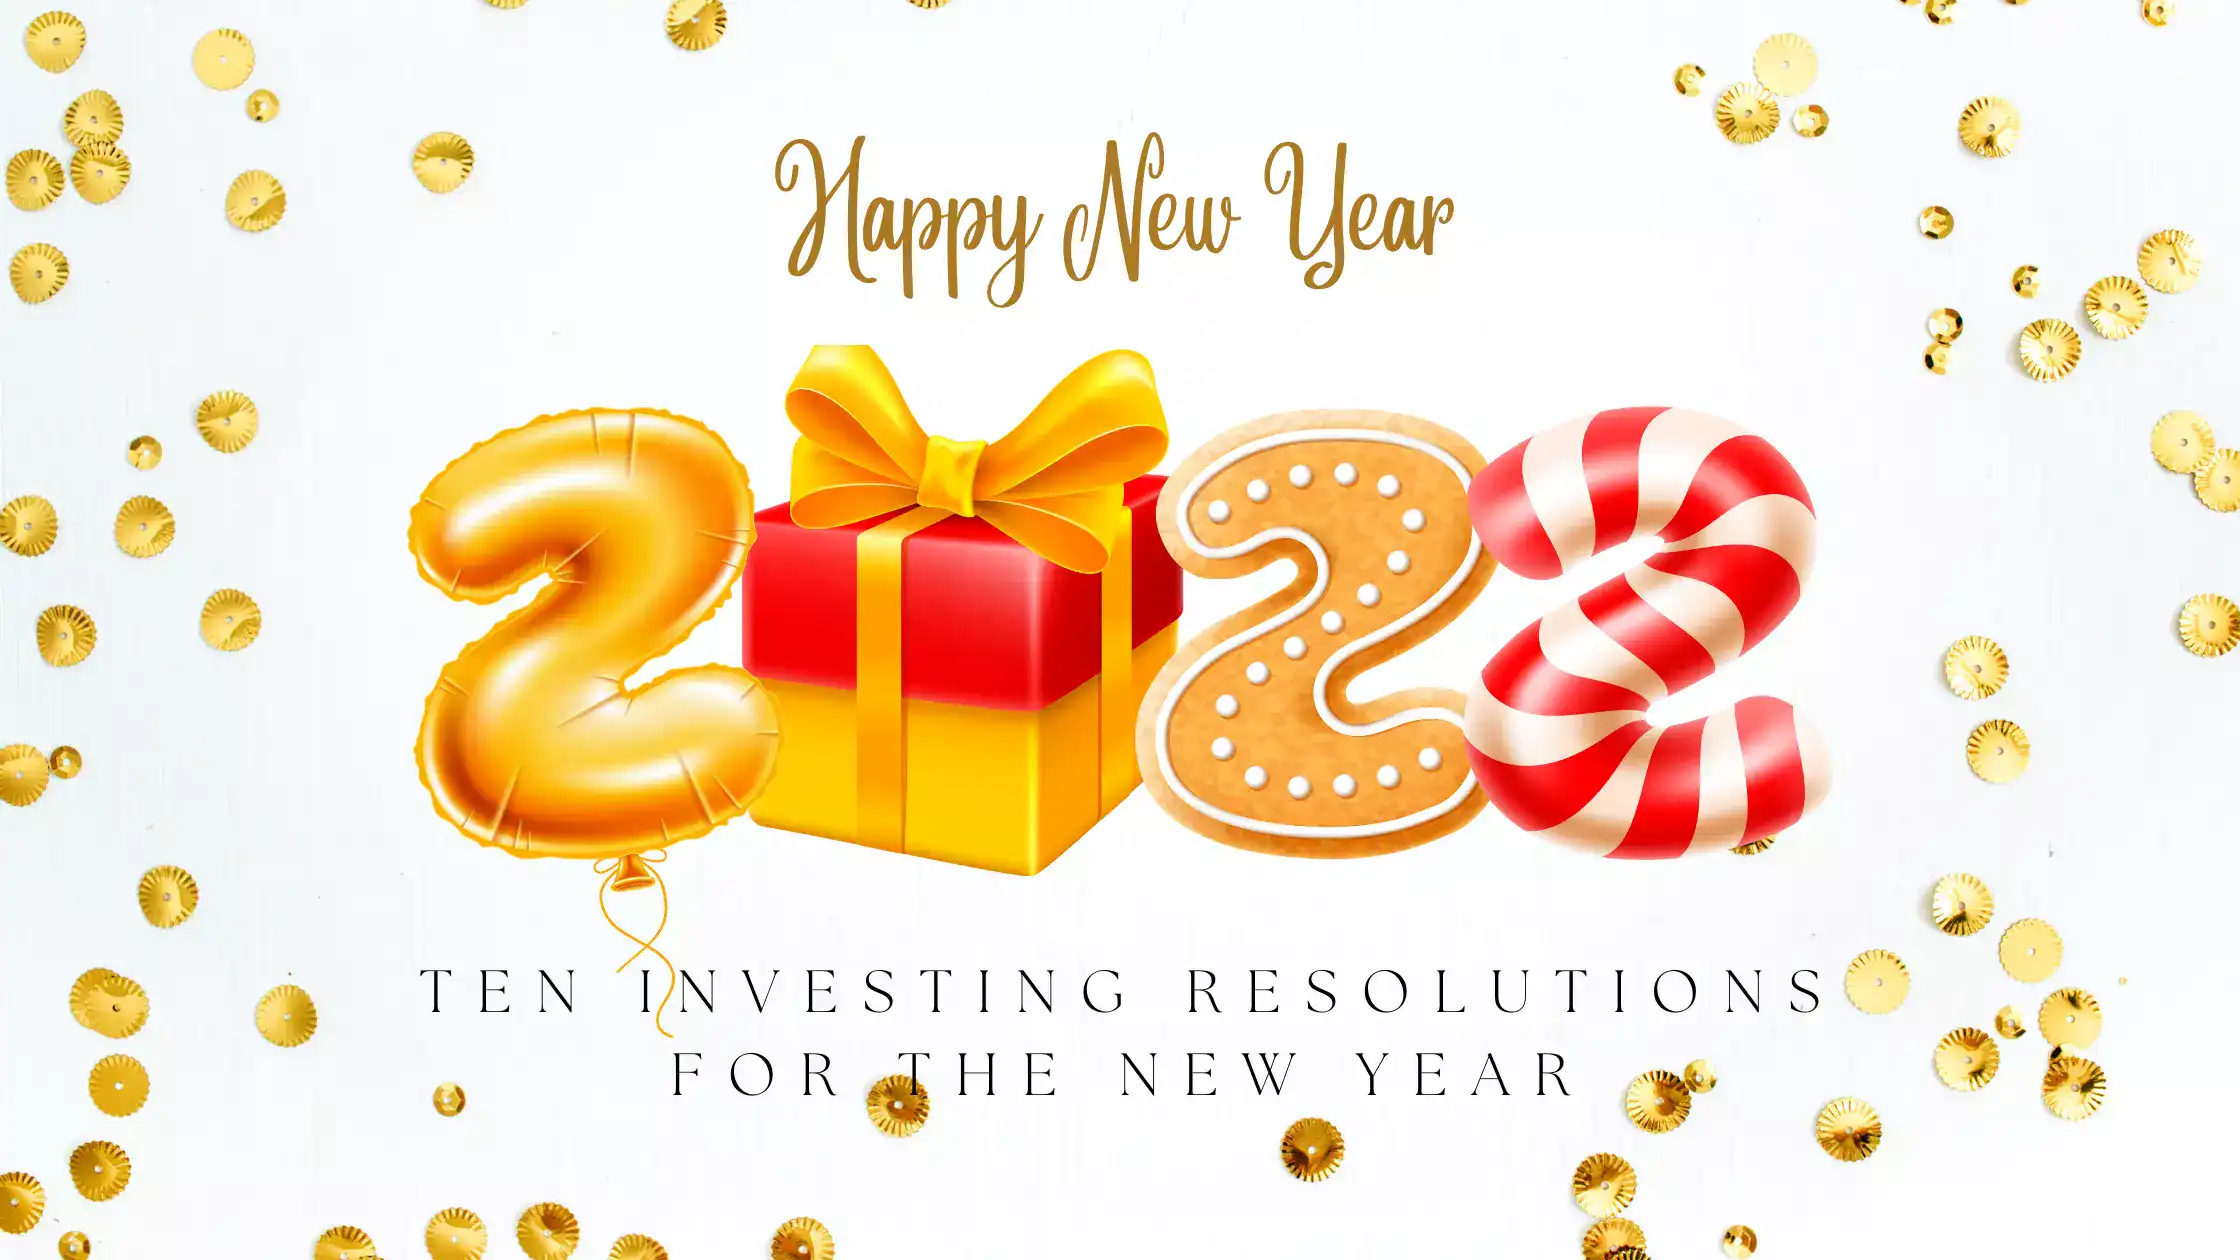 10 Investing Resolutions